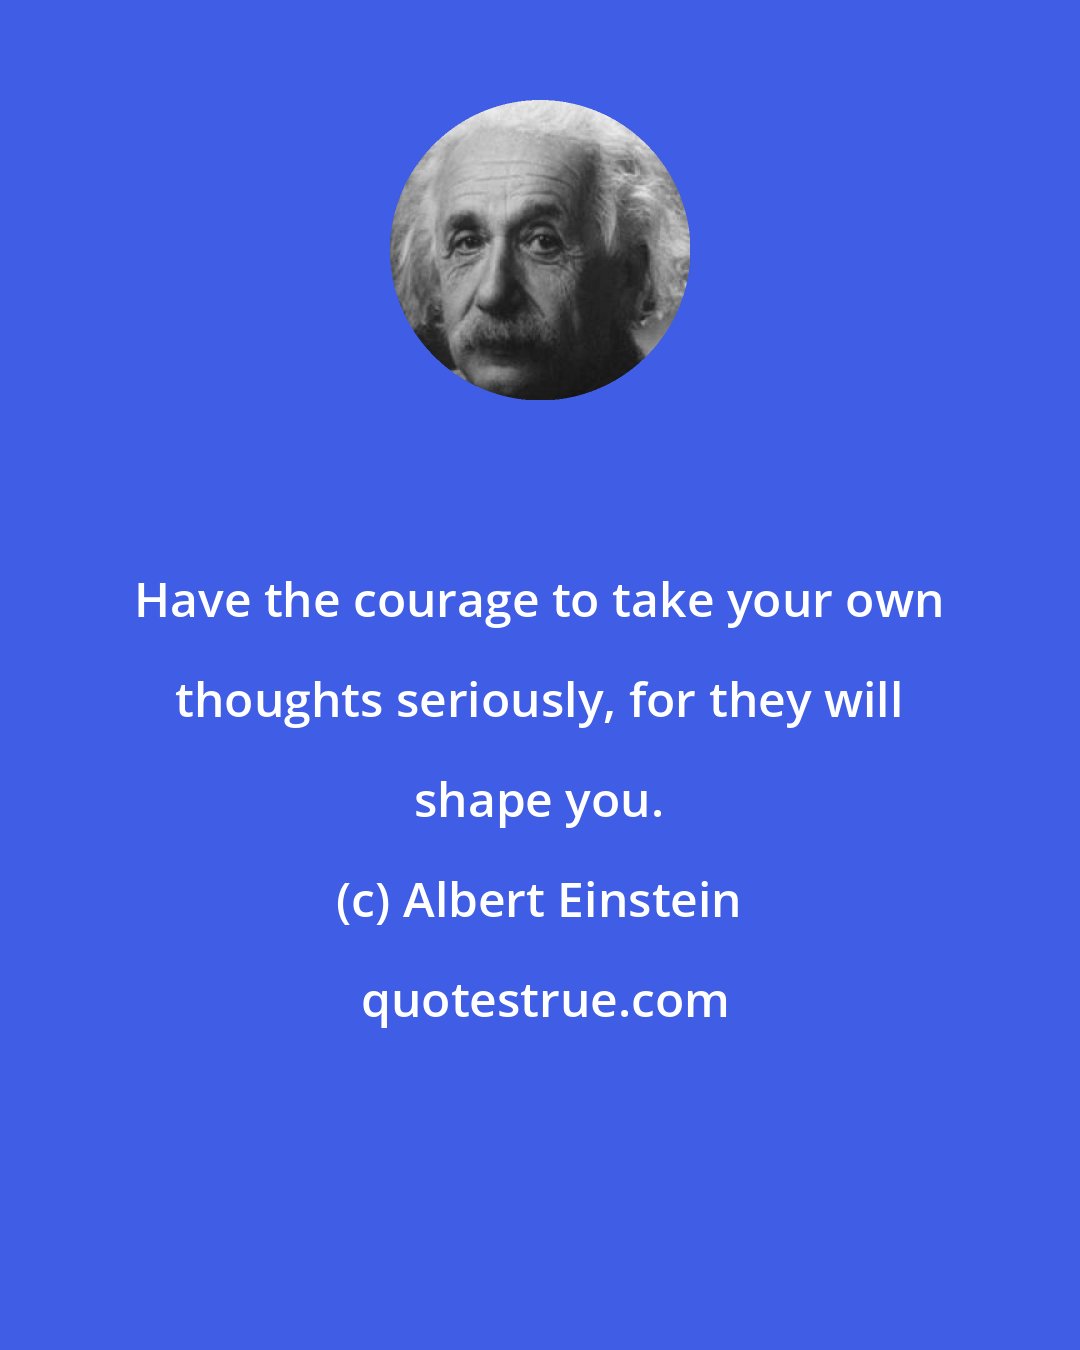 Albert Einstein: Have the courage to take your own thoughts seriously, for they will shape you.